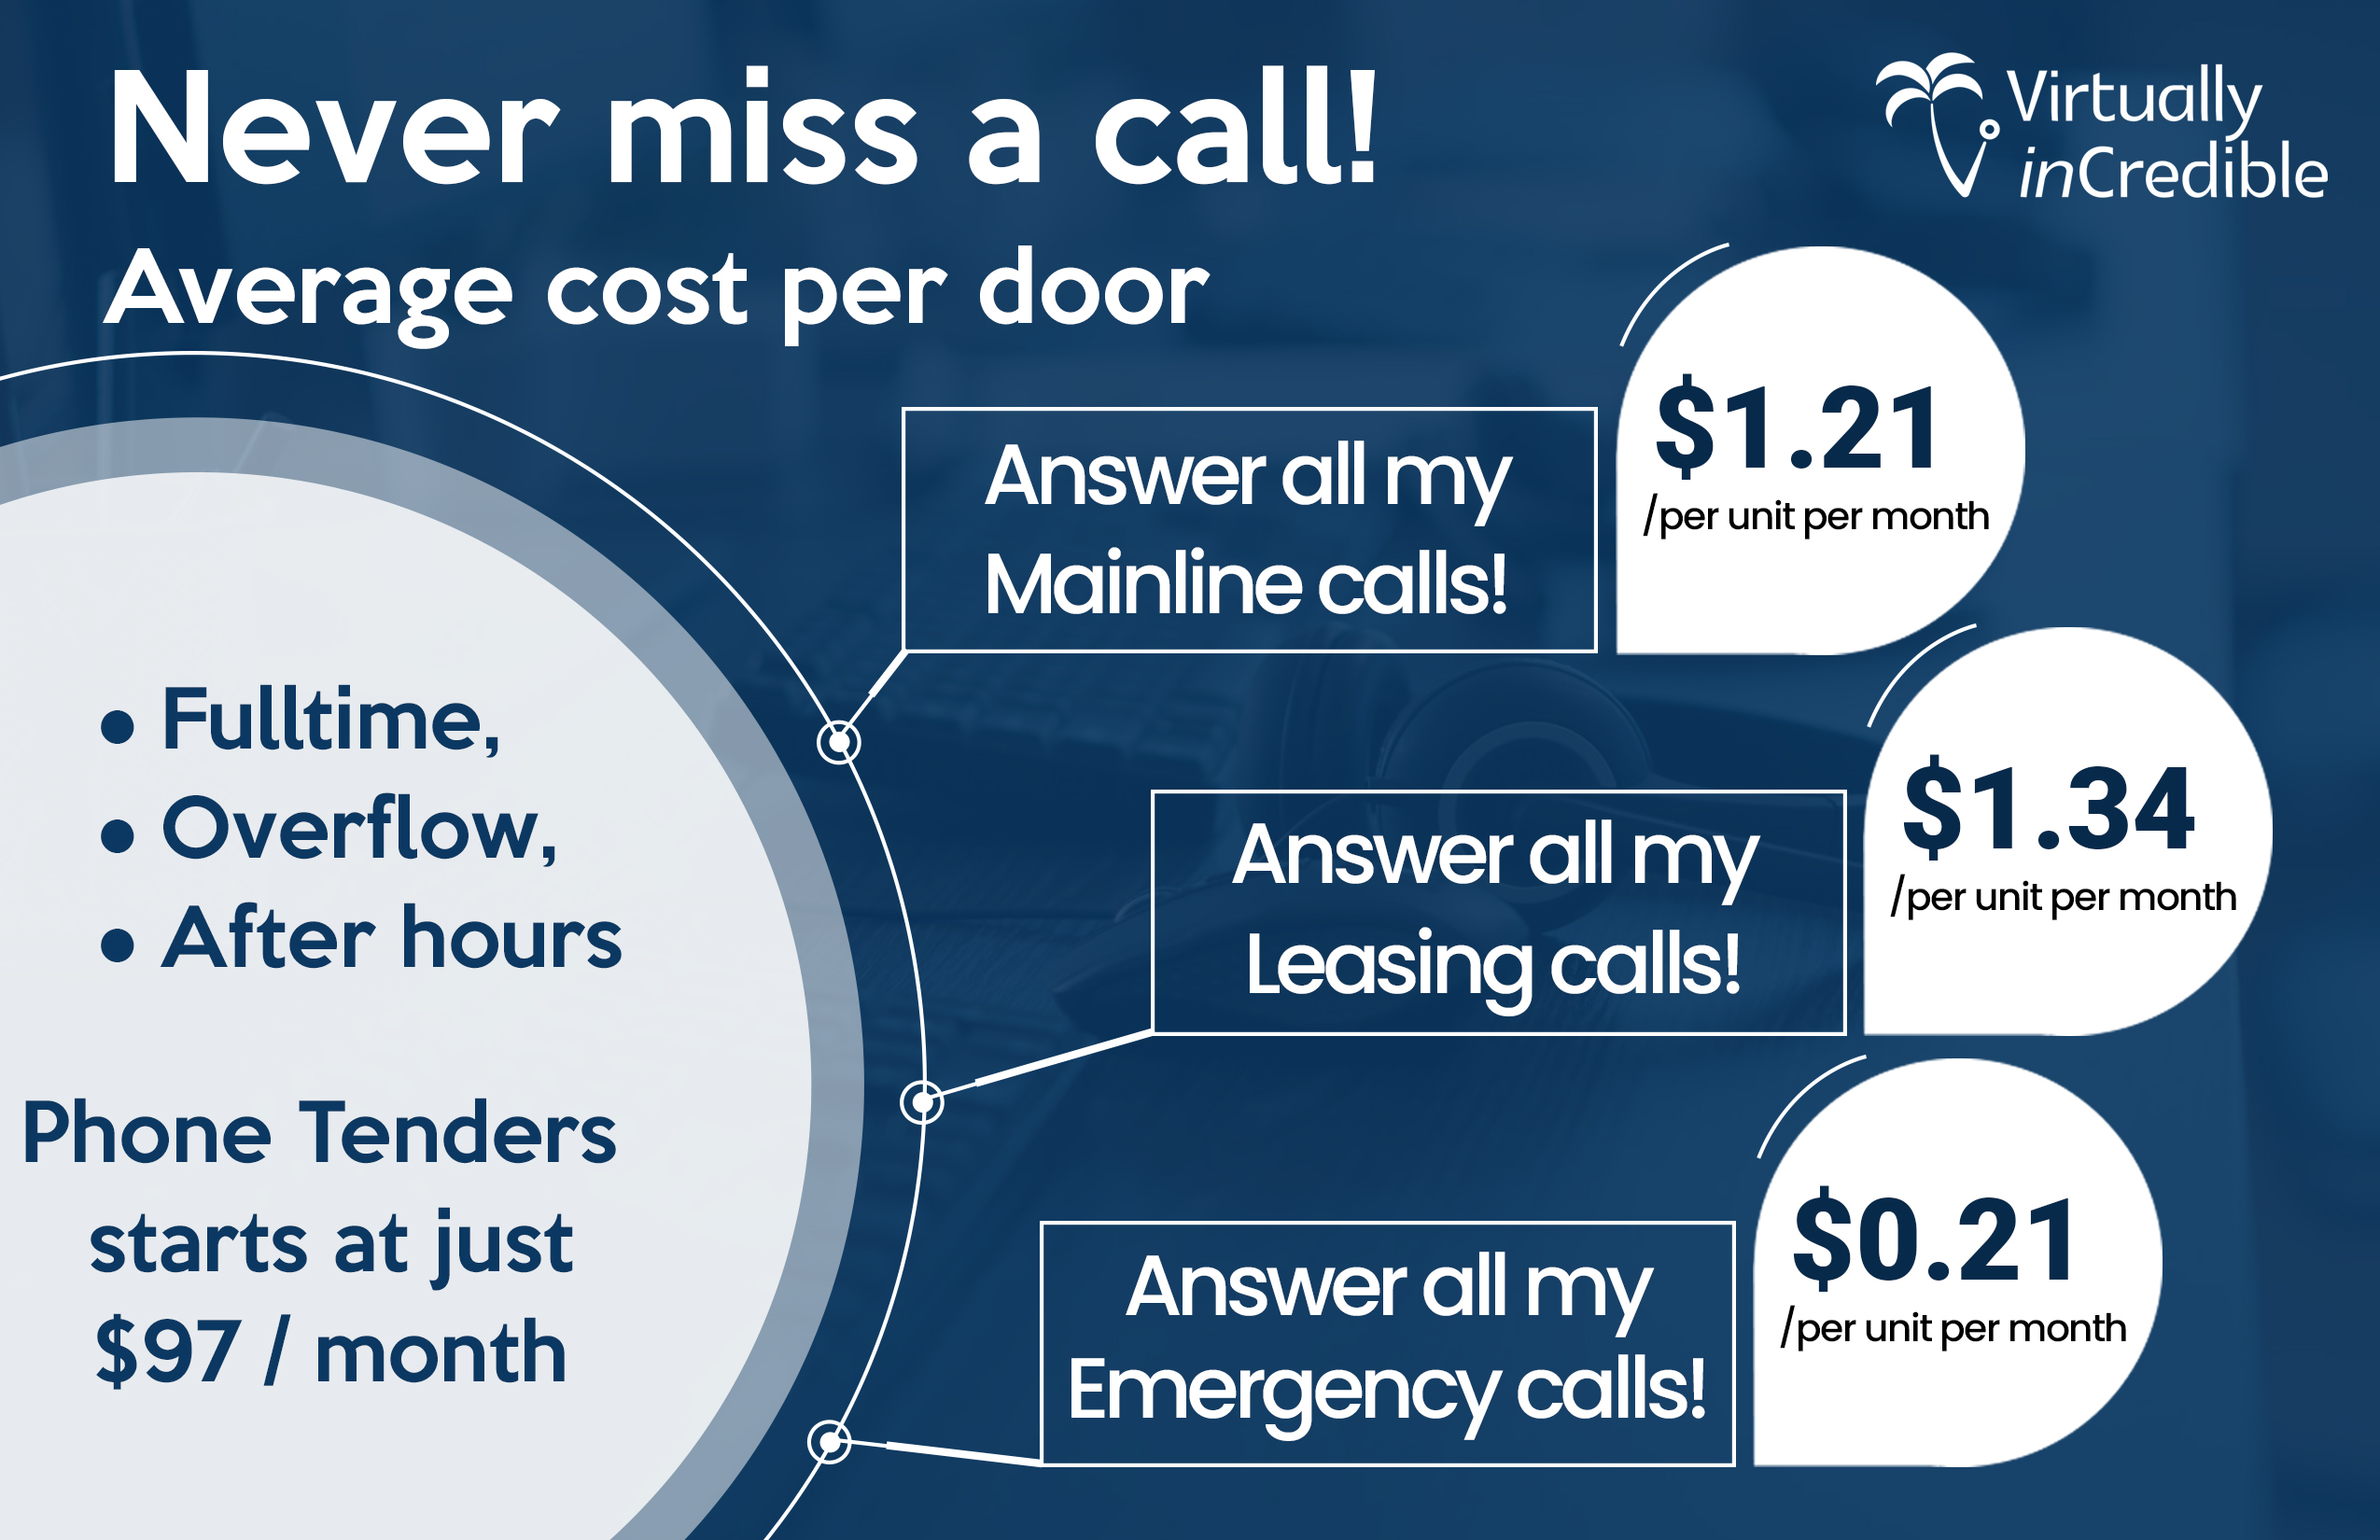 Phone Tenders never miss a call at your property management company